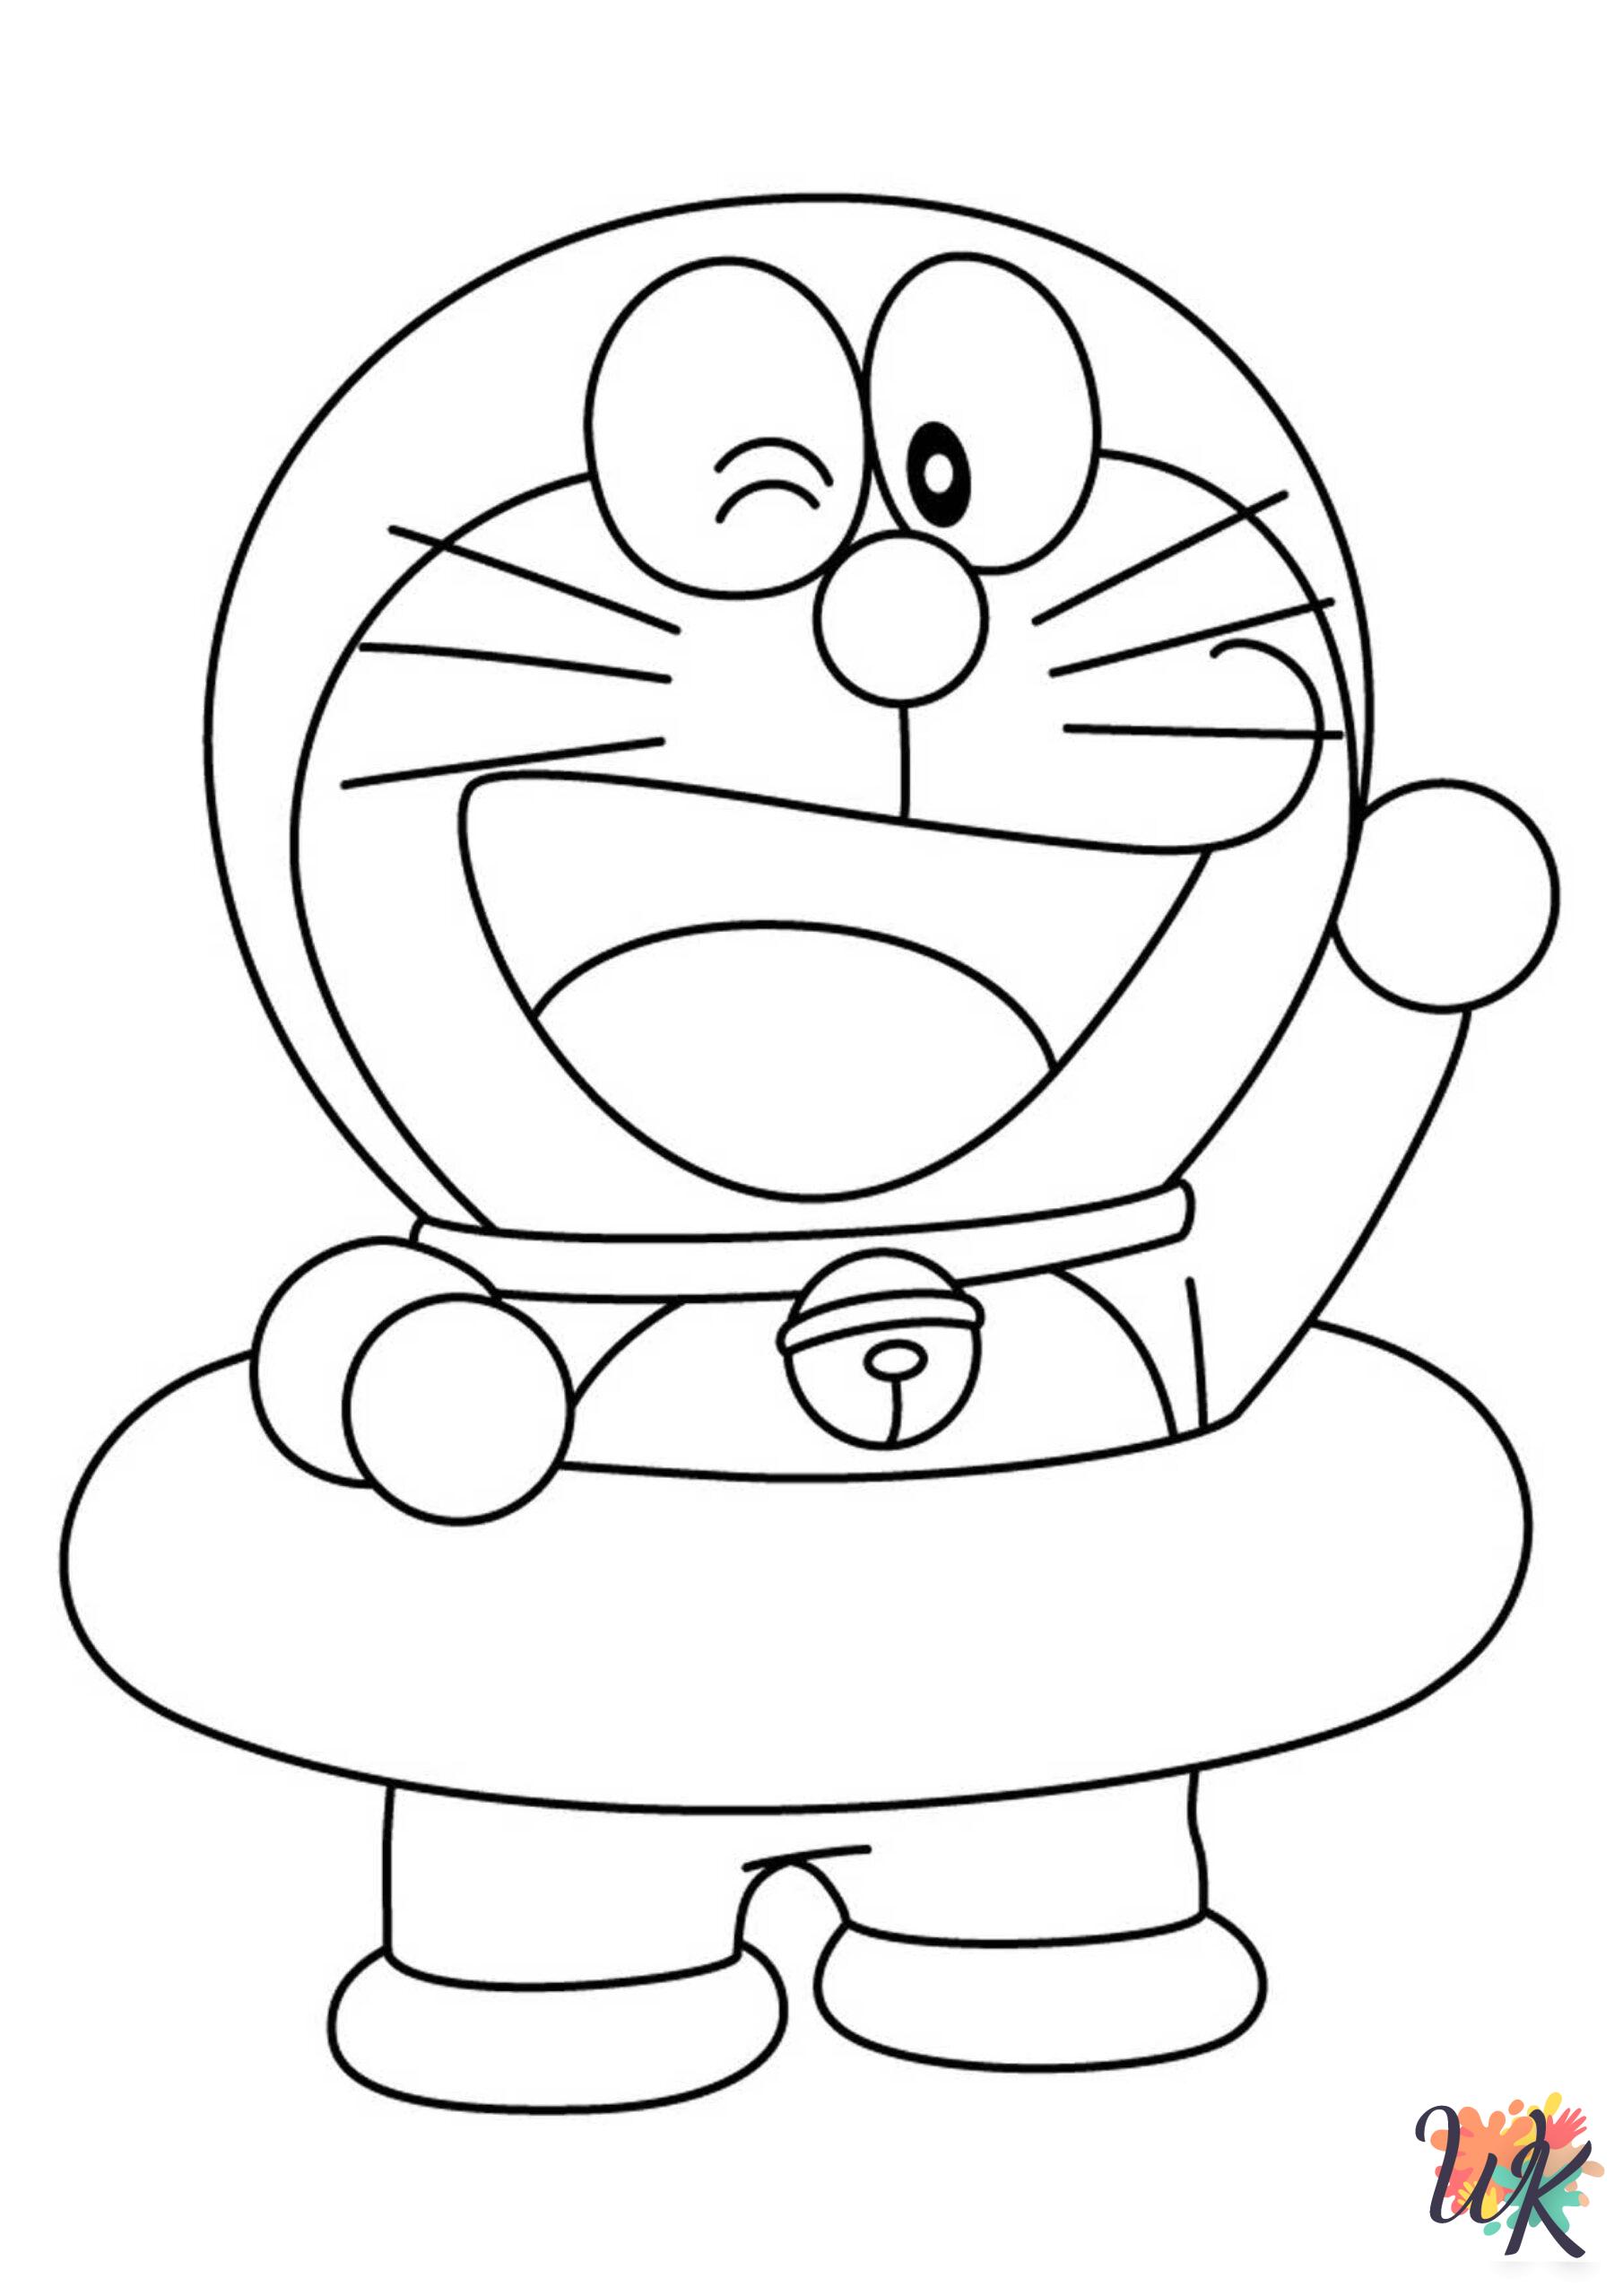 Doraemon coloring pages to print